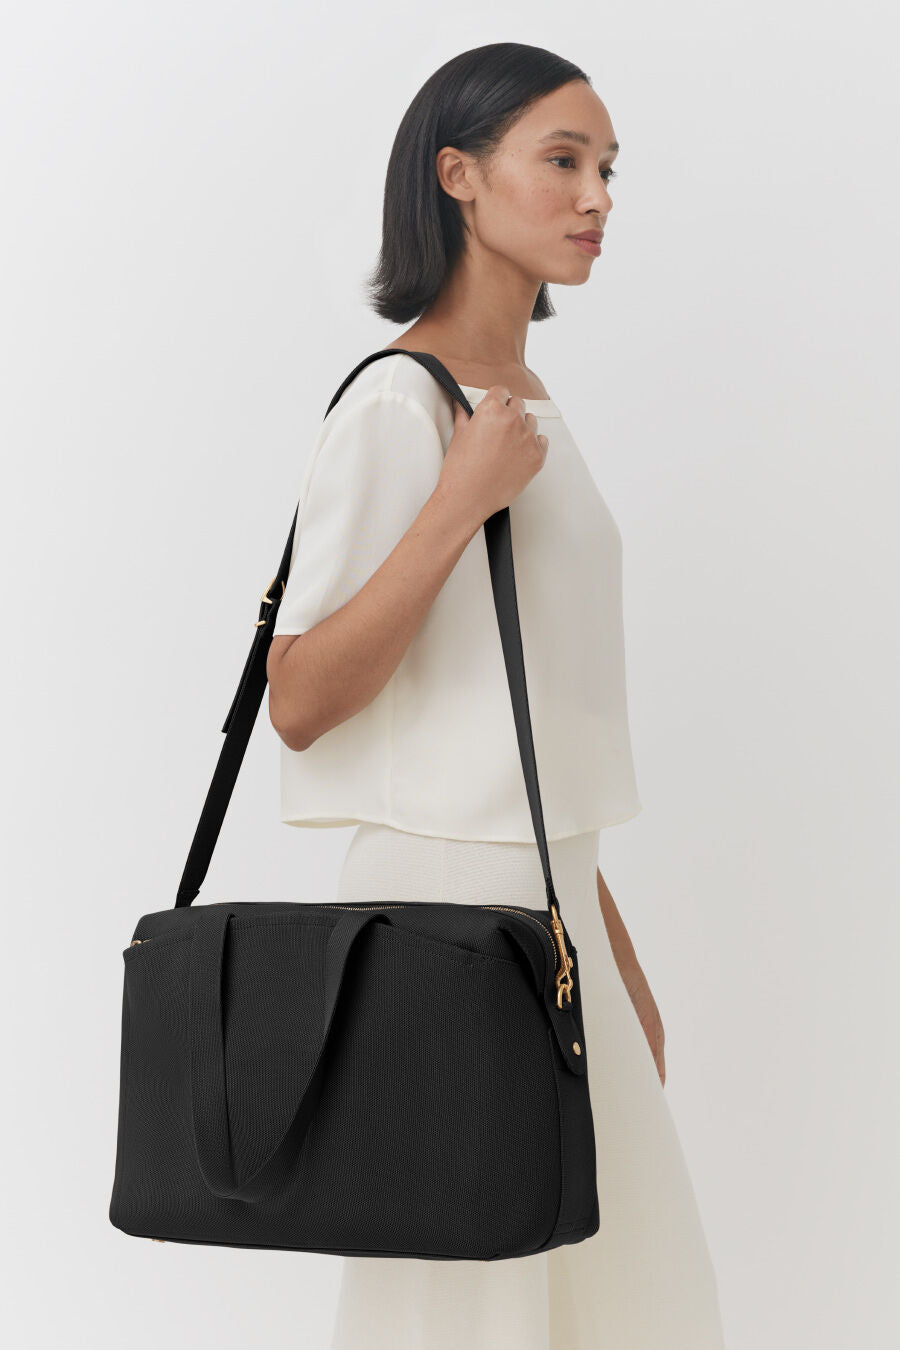 The Travel Bags – Cuyana